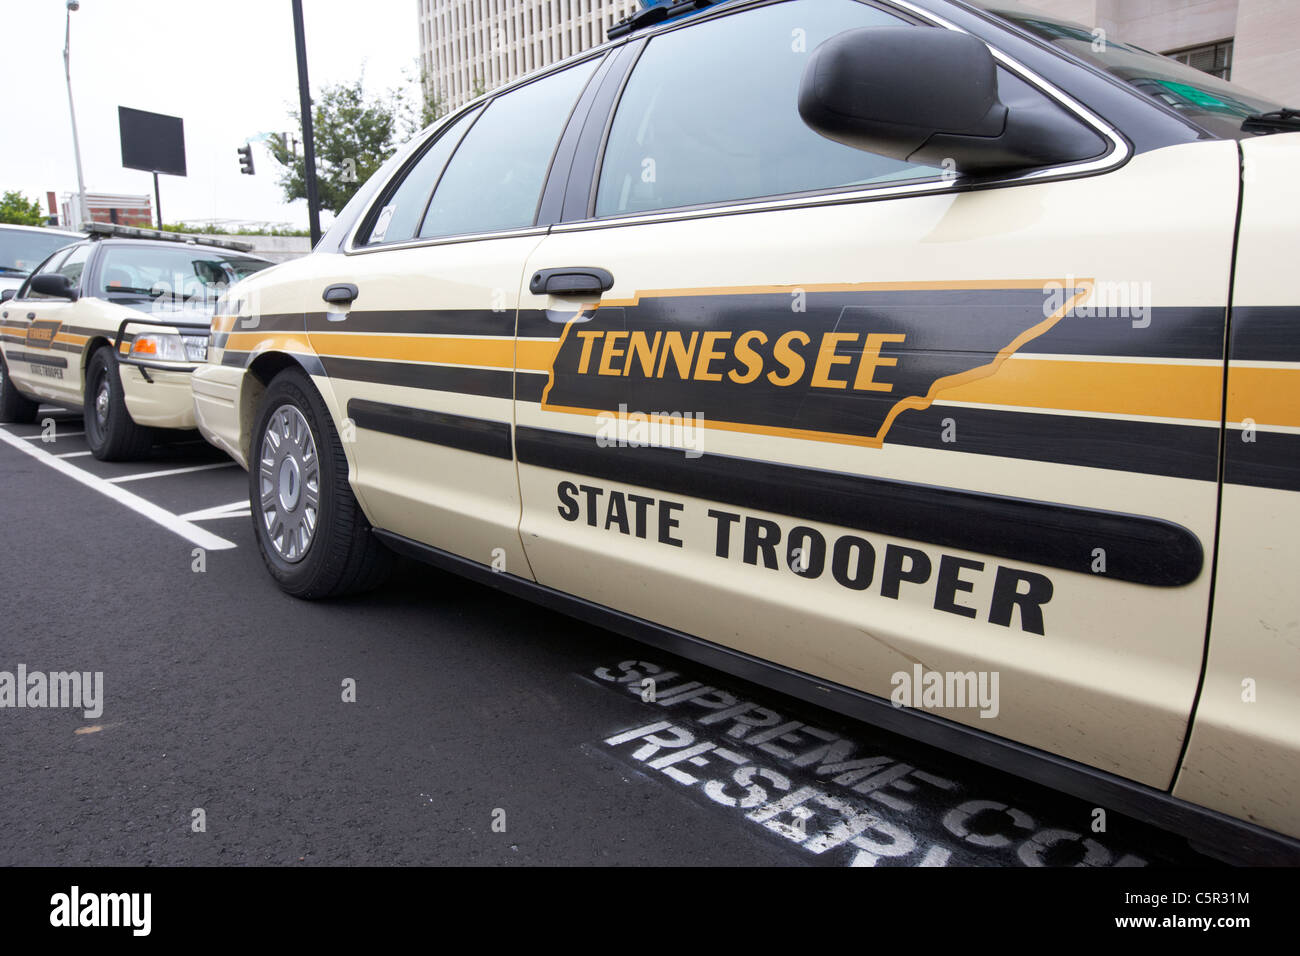 Tennessee state trooper patrol car Nashville Tennessee USA Stock Photo